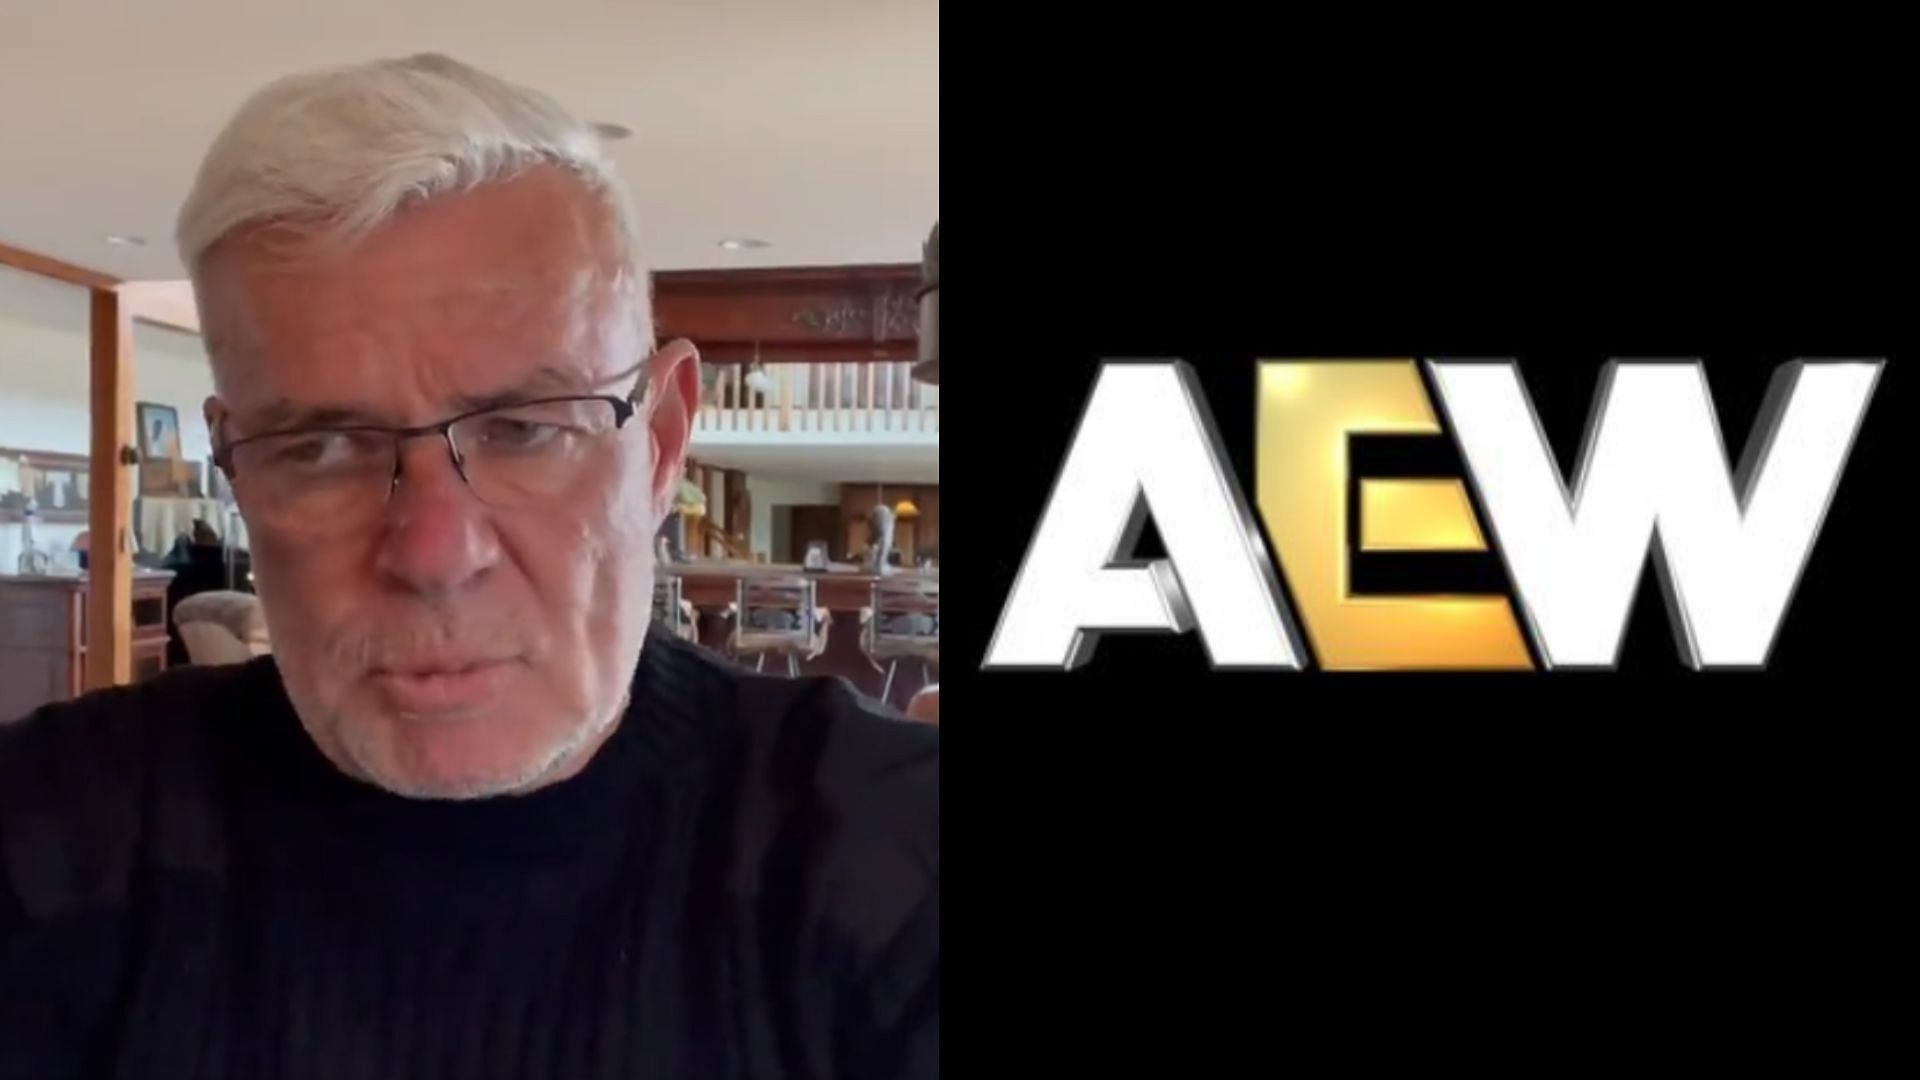 Eric Bischoff has often voiced his critiques of AEW [Image Credits: Eric Bischoff